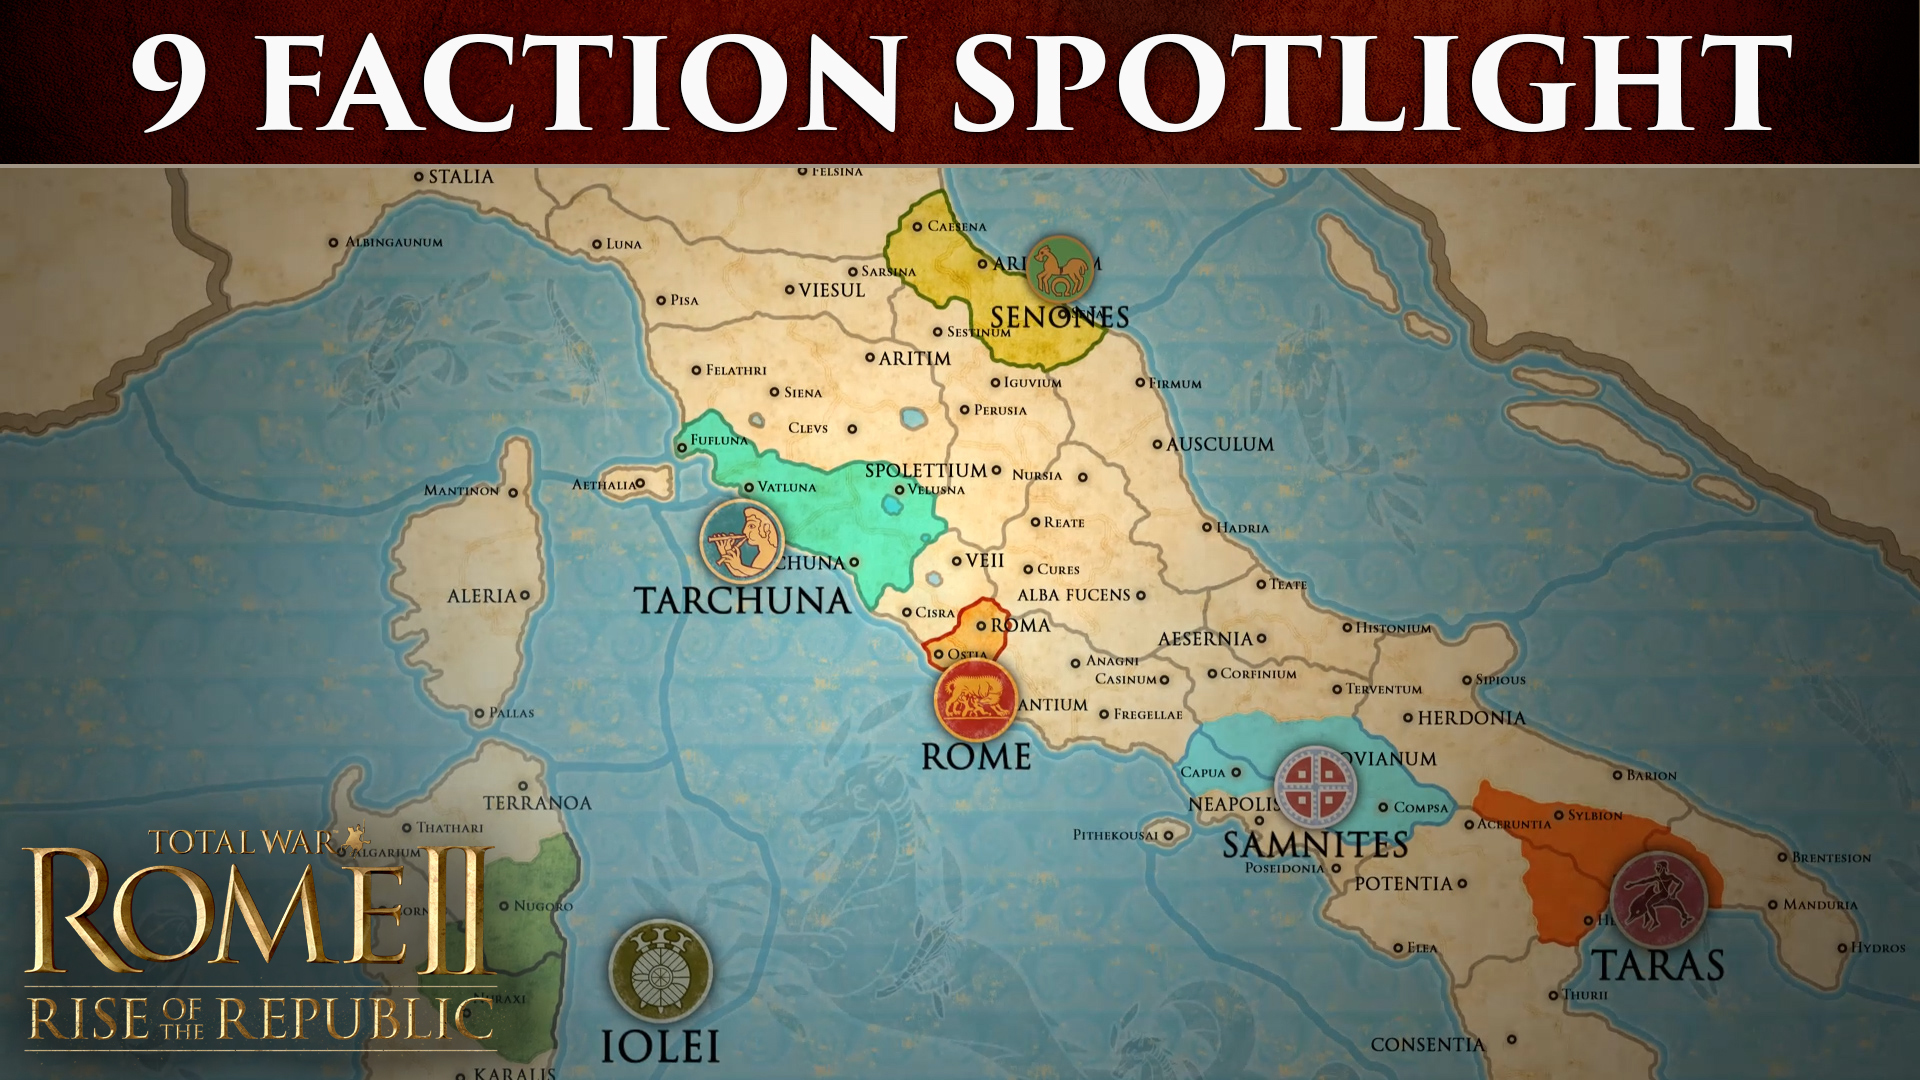 rome total war 2 more playable factions